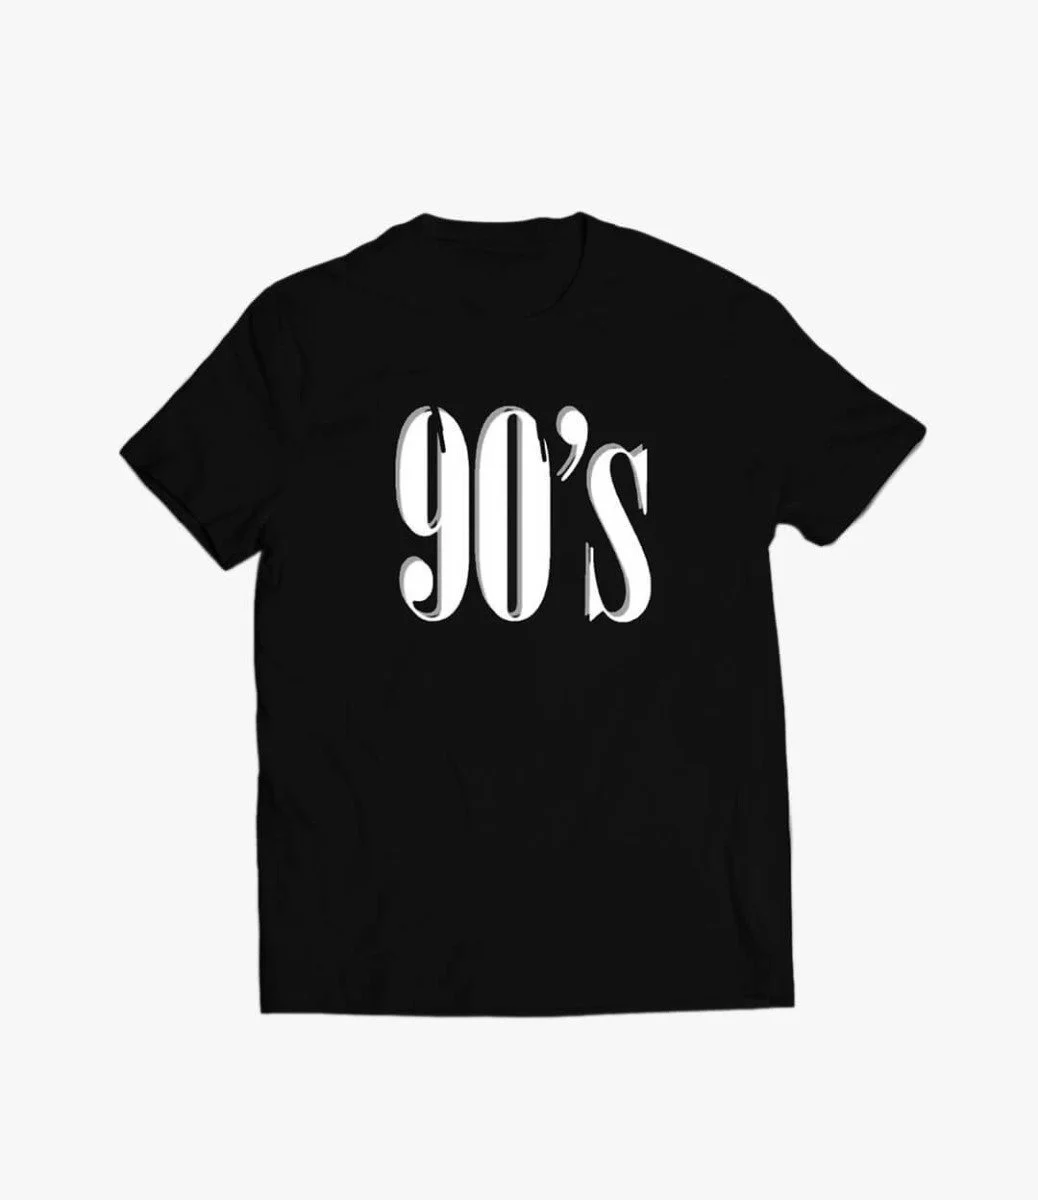 Men's Black Printed T-shirt with Writing 90's